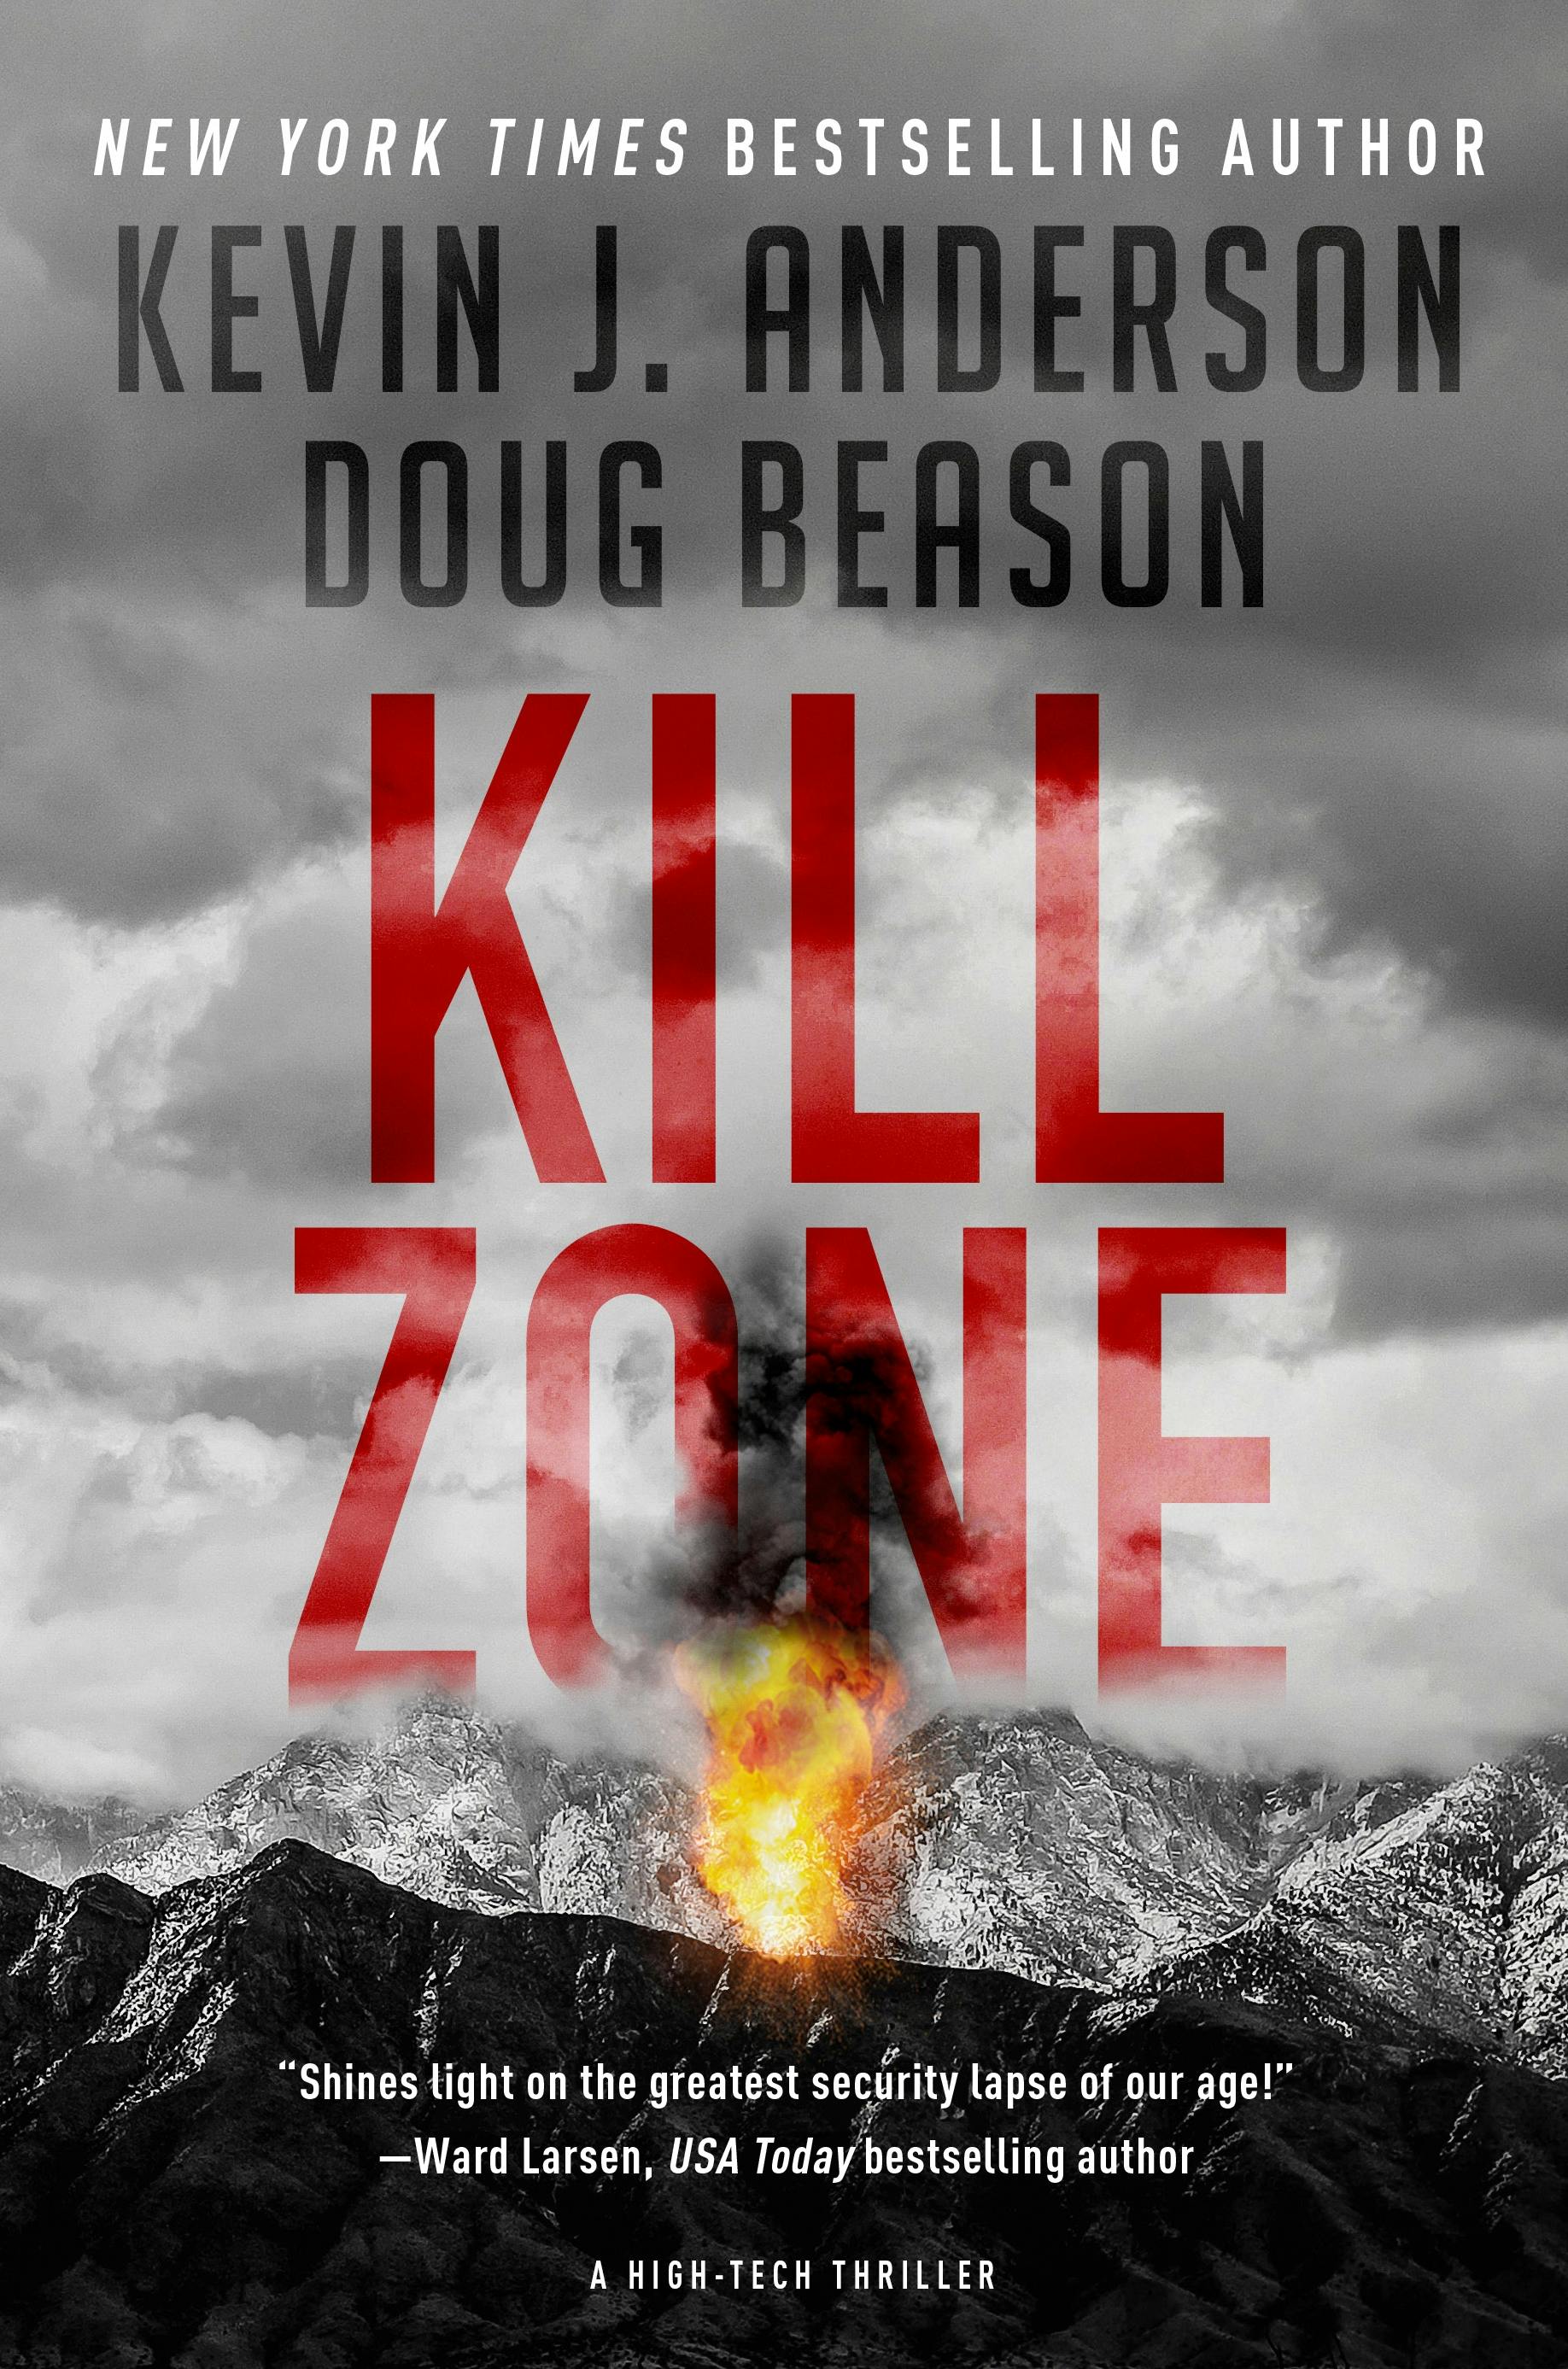 Cover for the book titled as: Kill Zone